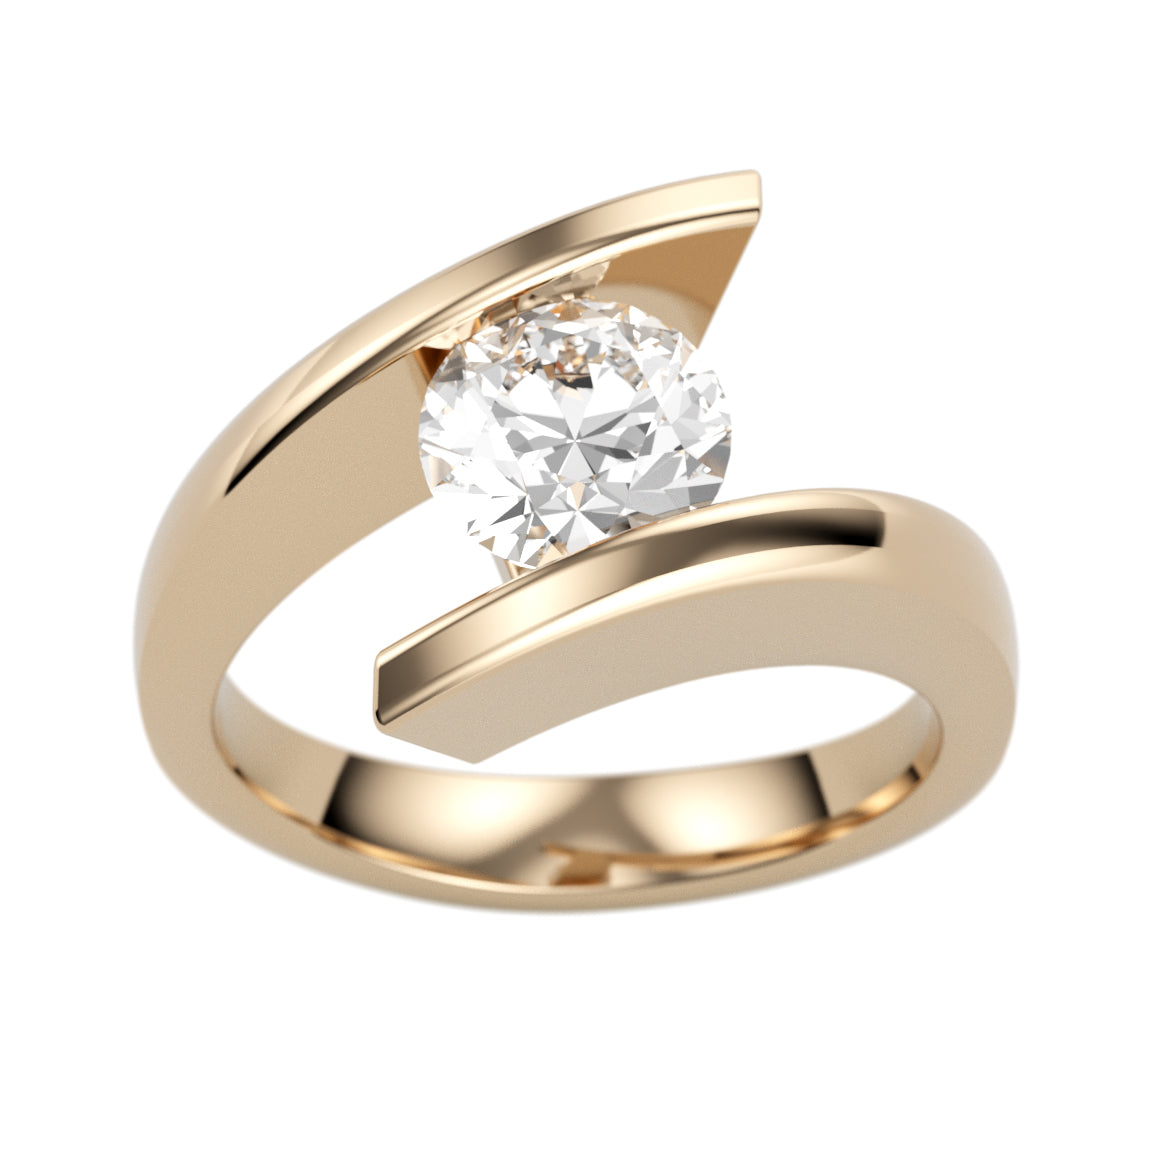 Tension Engagement Rings: Contemporary Elegance Defined